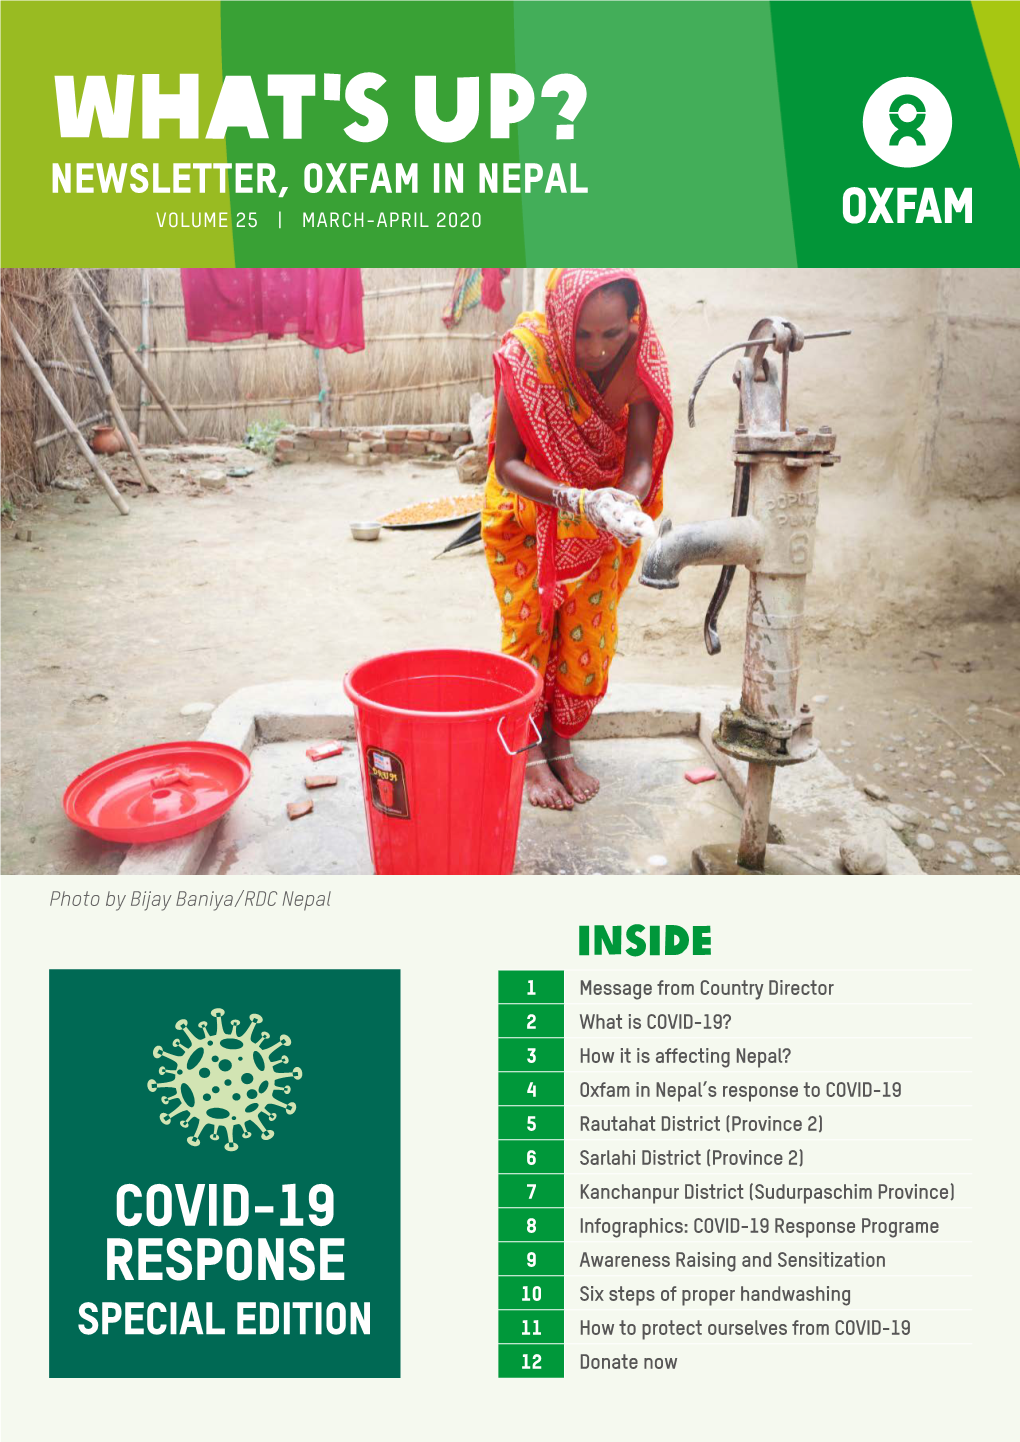 WHAT's UP? Newsletter, Oxfam in Nepal VOLUME 25 | MARCH-APRIL 2020